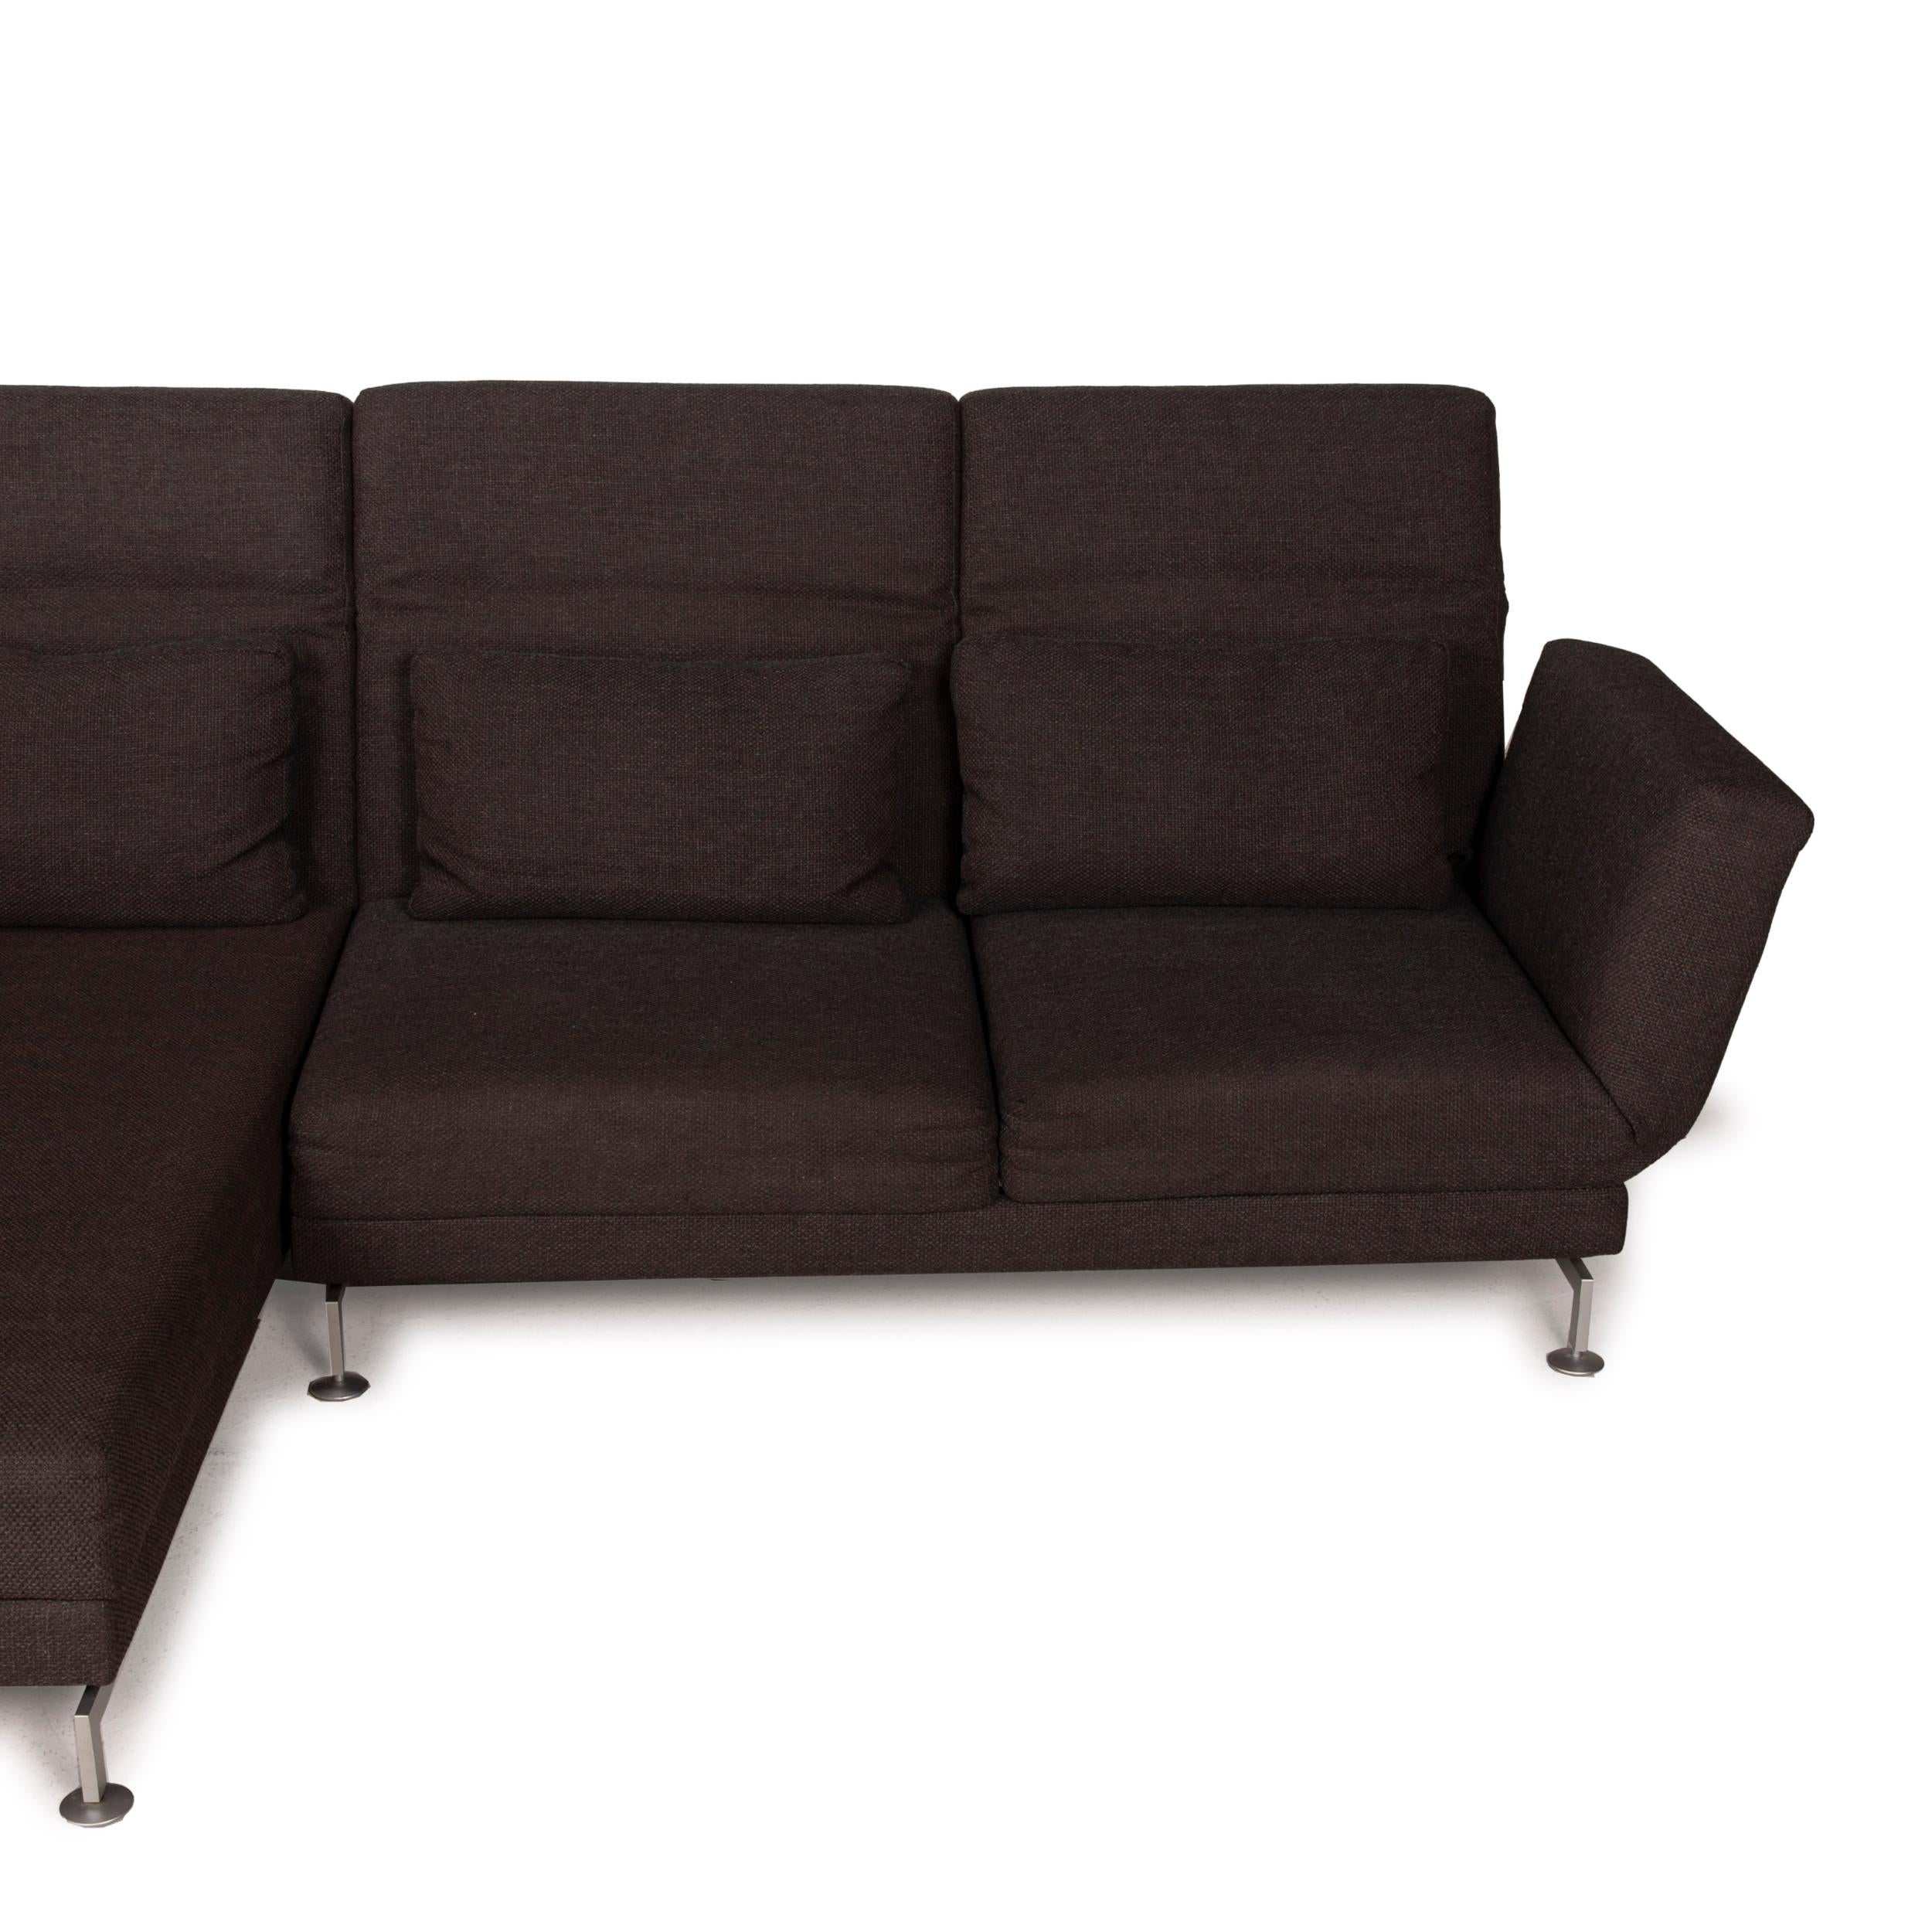 Brühl & Sippold Moule Fabric Sofa Brown Corner Sofa Function Relaxation 4